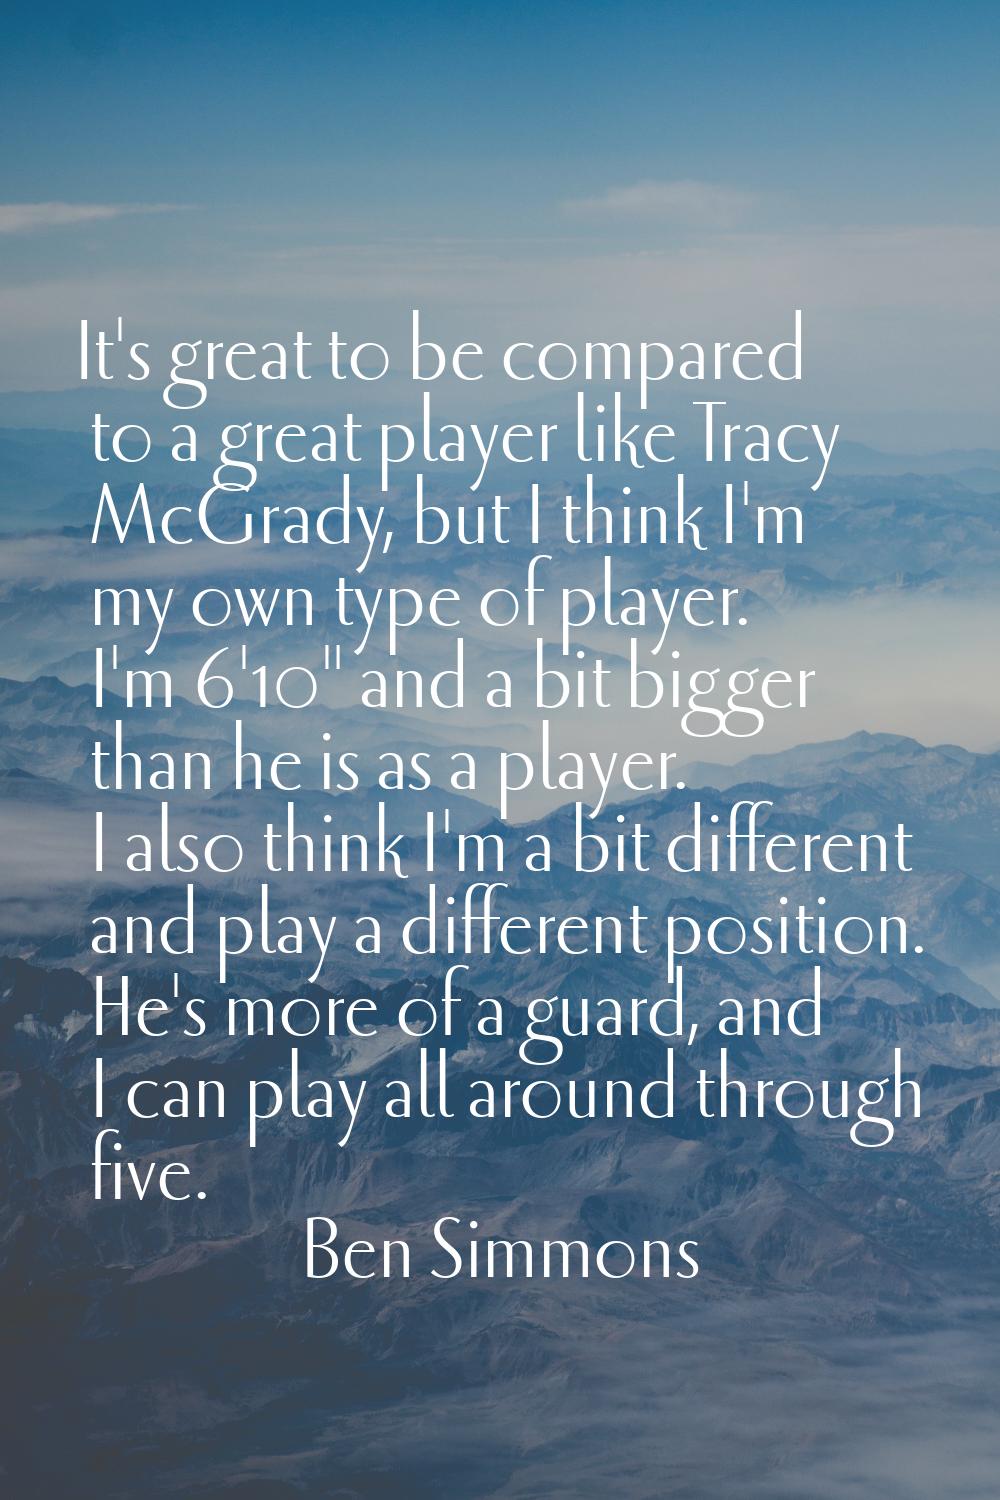 It's great to be compared to a great player like Tracy McGrady, but I think I'm my own type of play